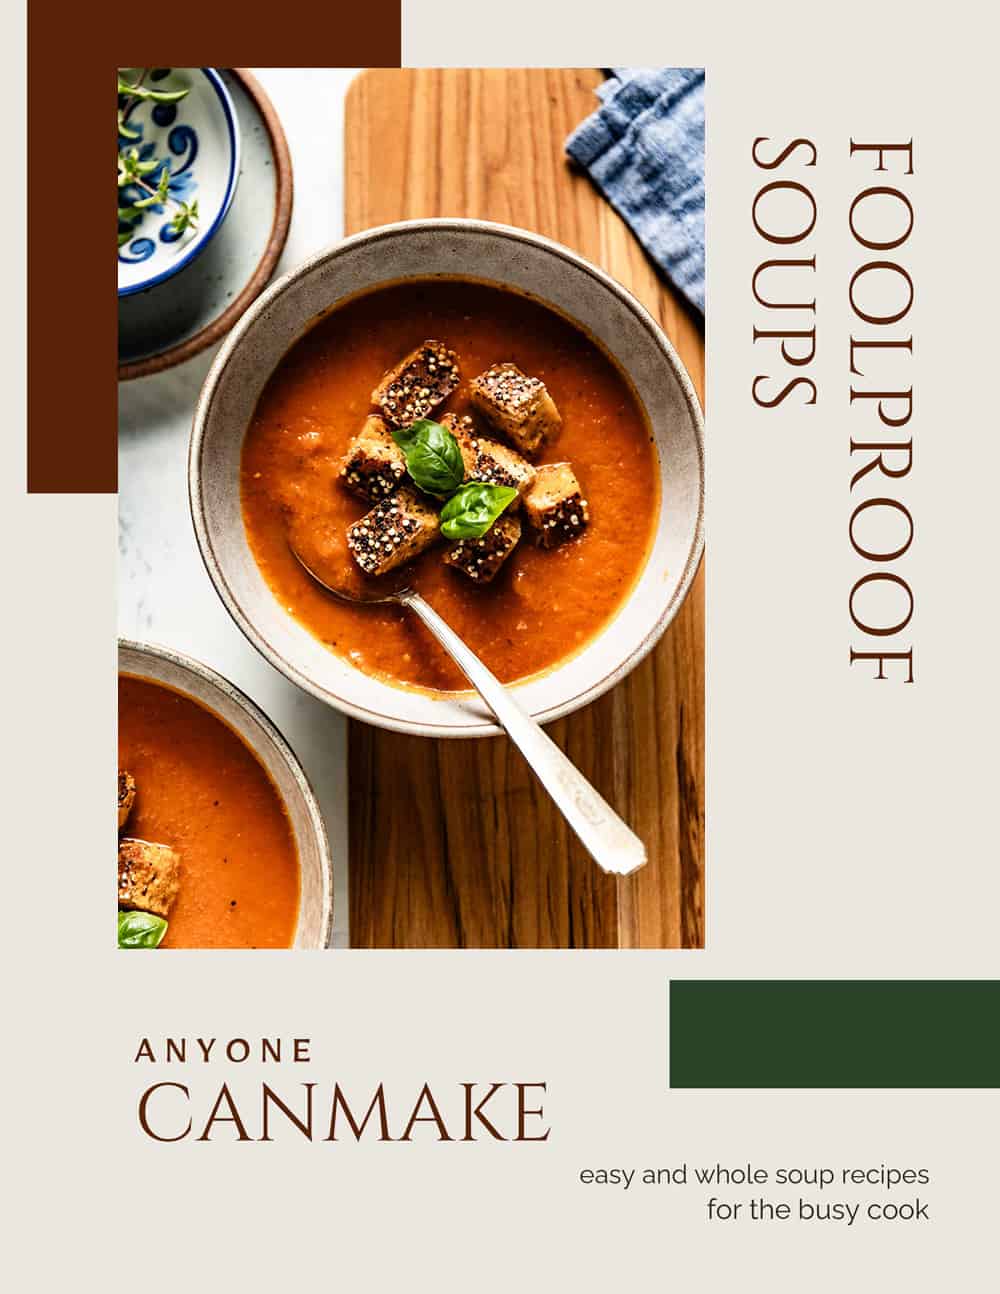 Foolproof soups ebook cover photo.